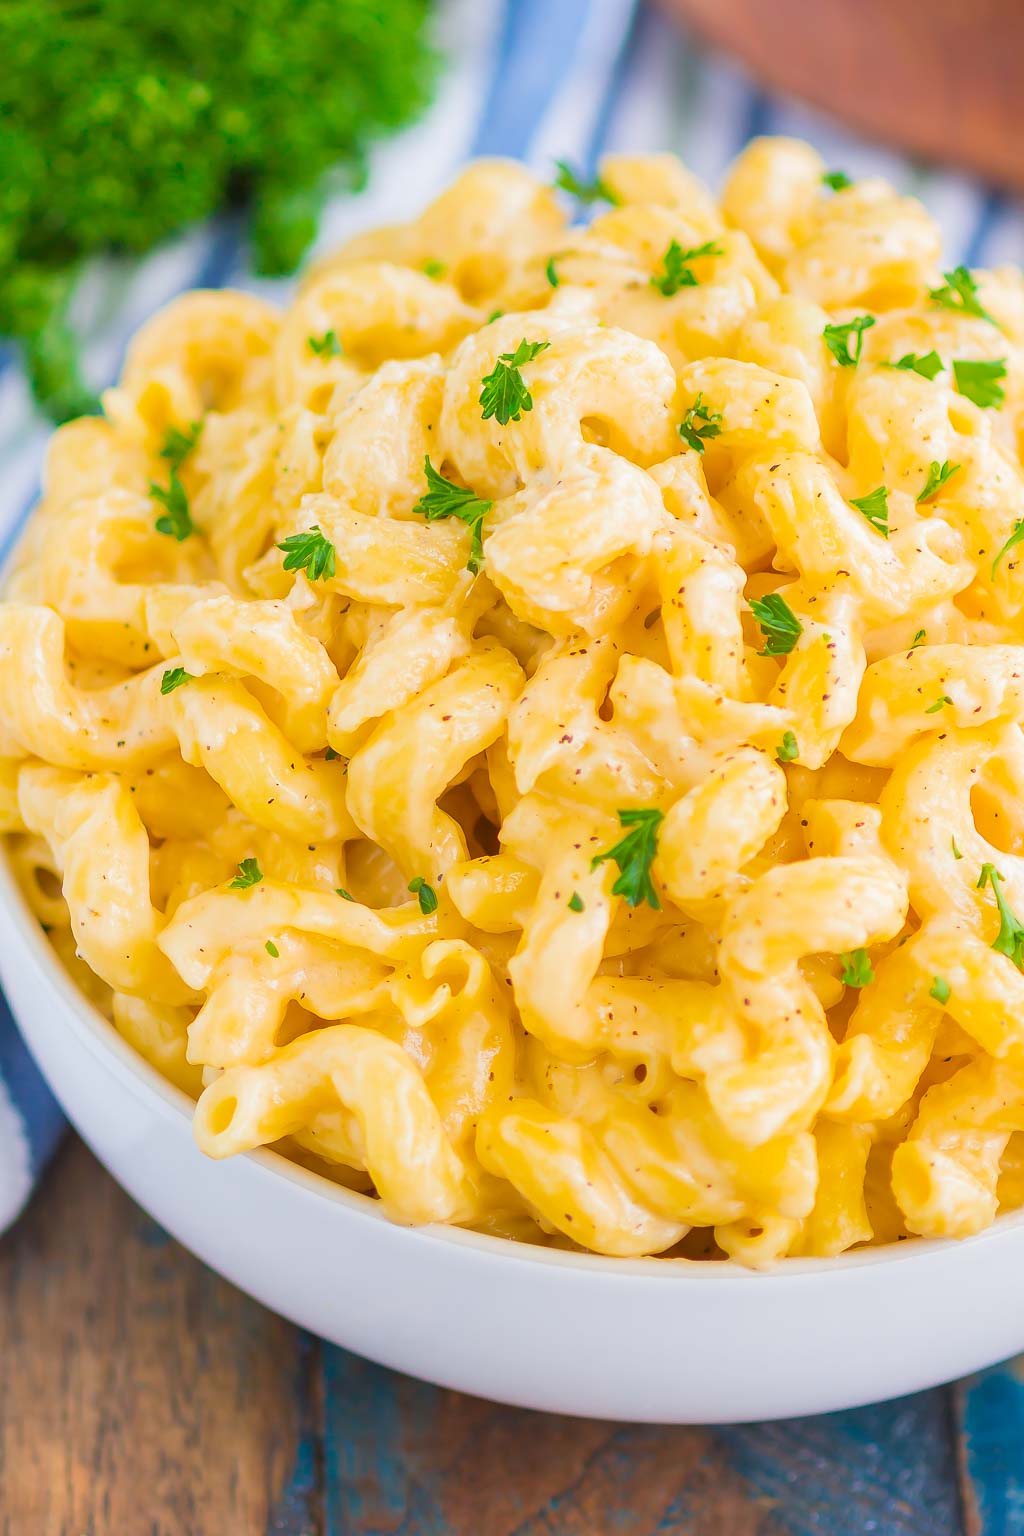 how long should you cook mac and cheese for?